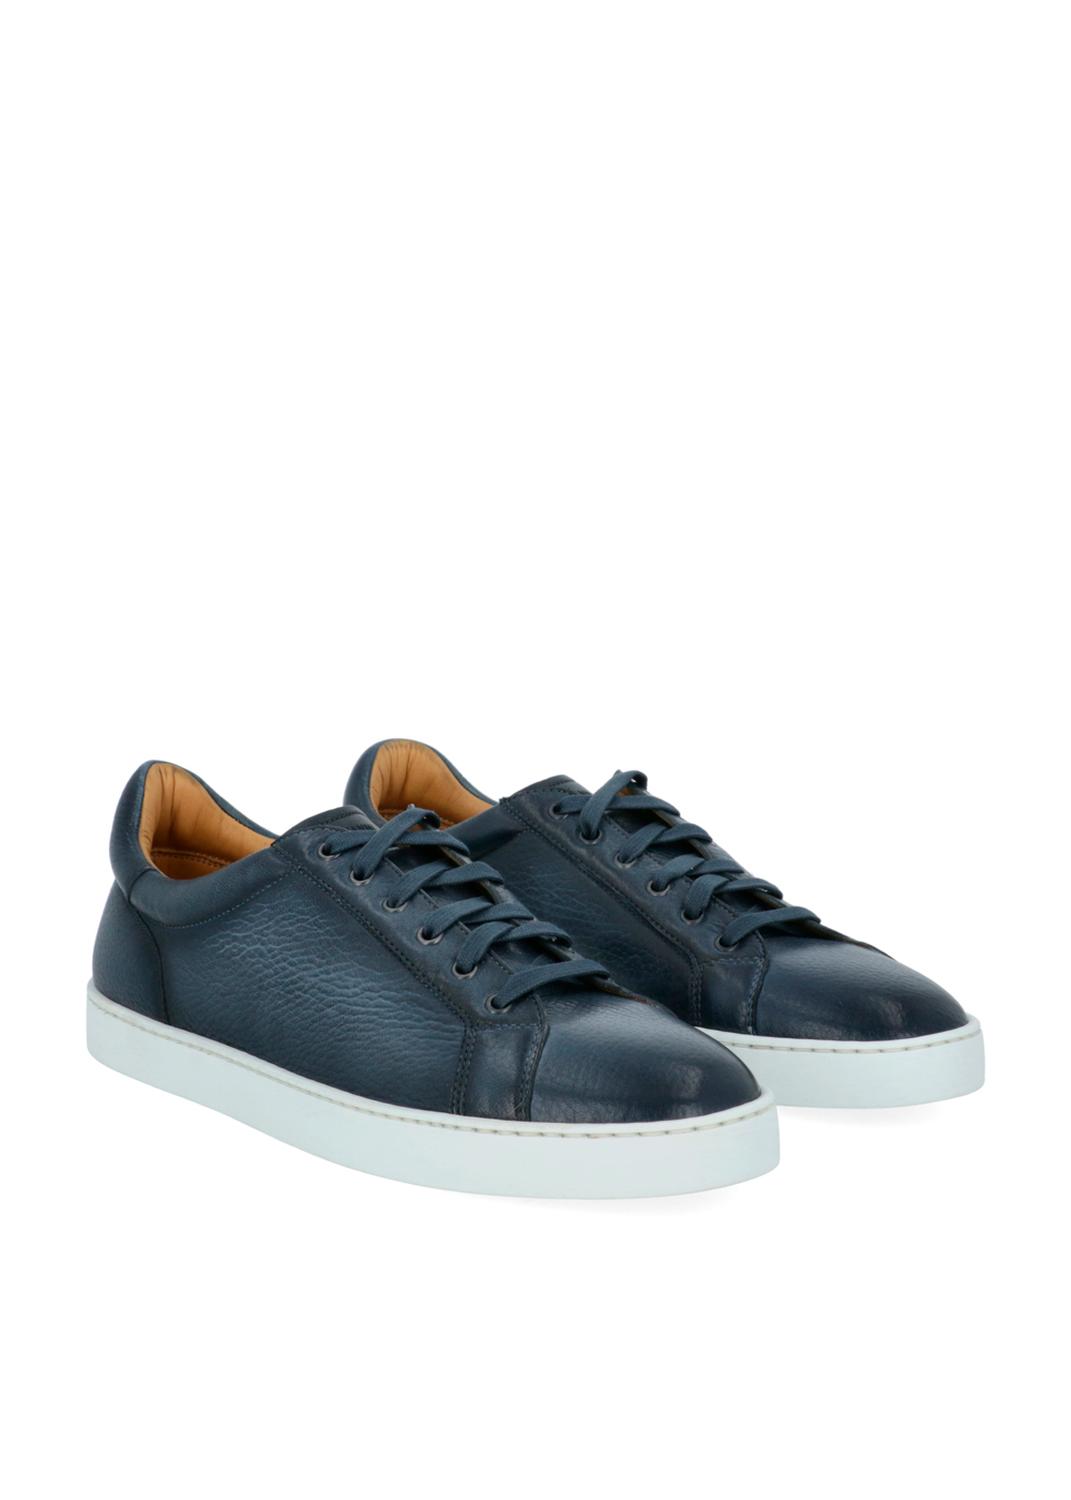 Magnanni tenis Leve MGN-25304